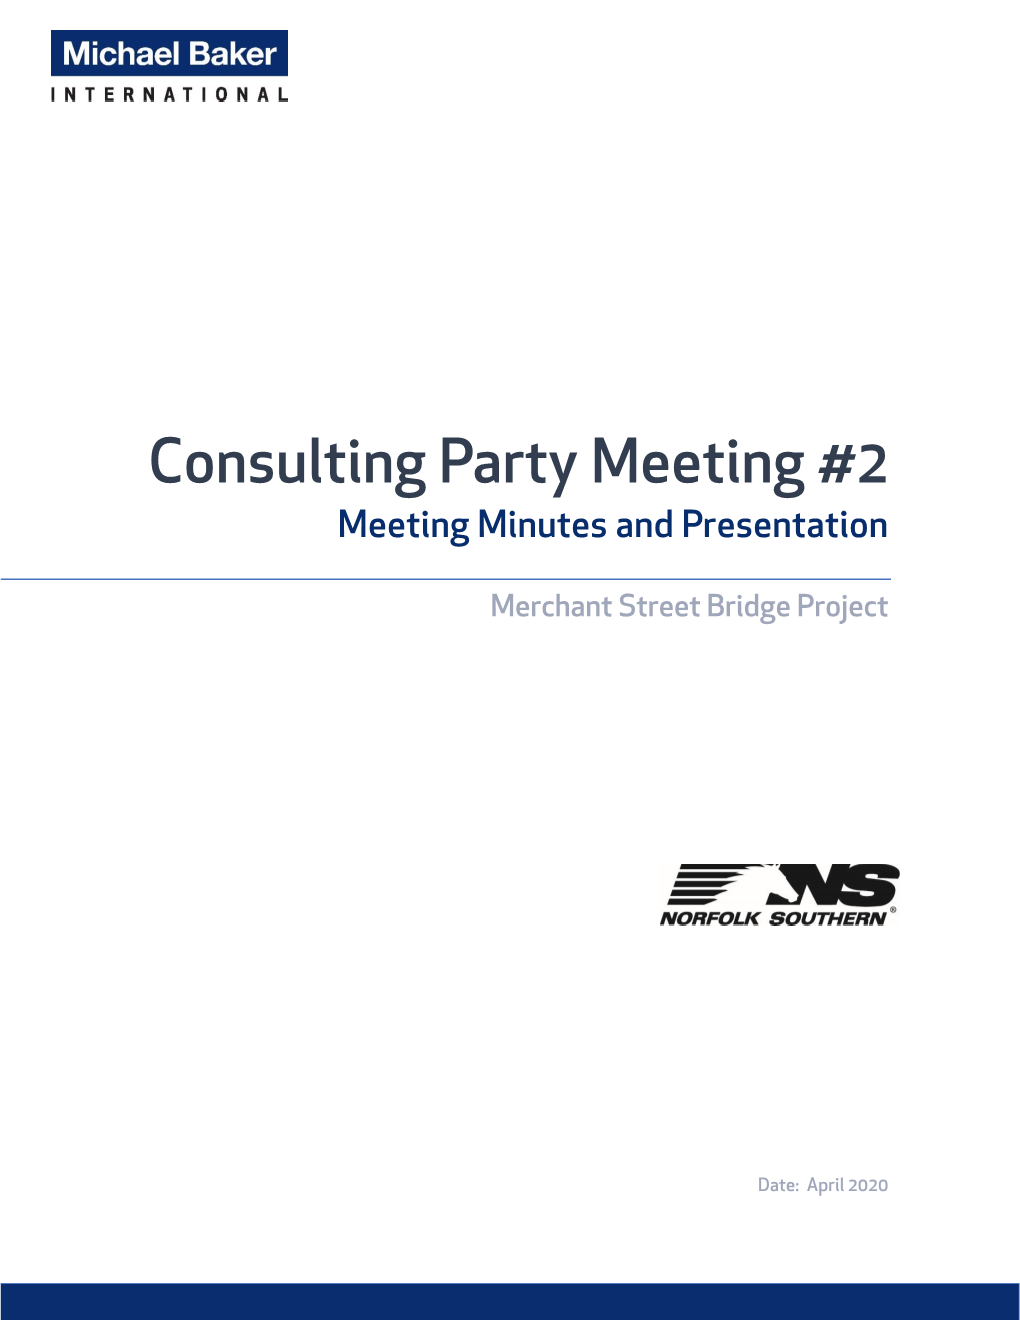 Consulting Party Meeting #2 Meeting Minutes and Presentation